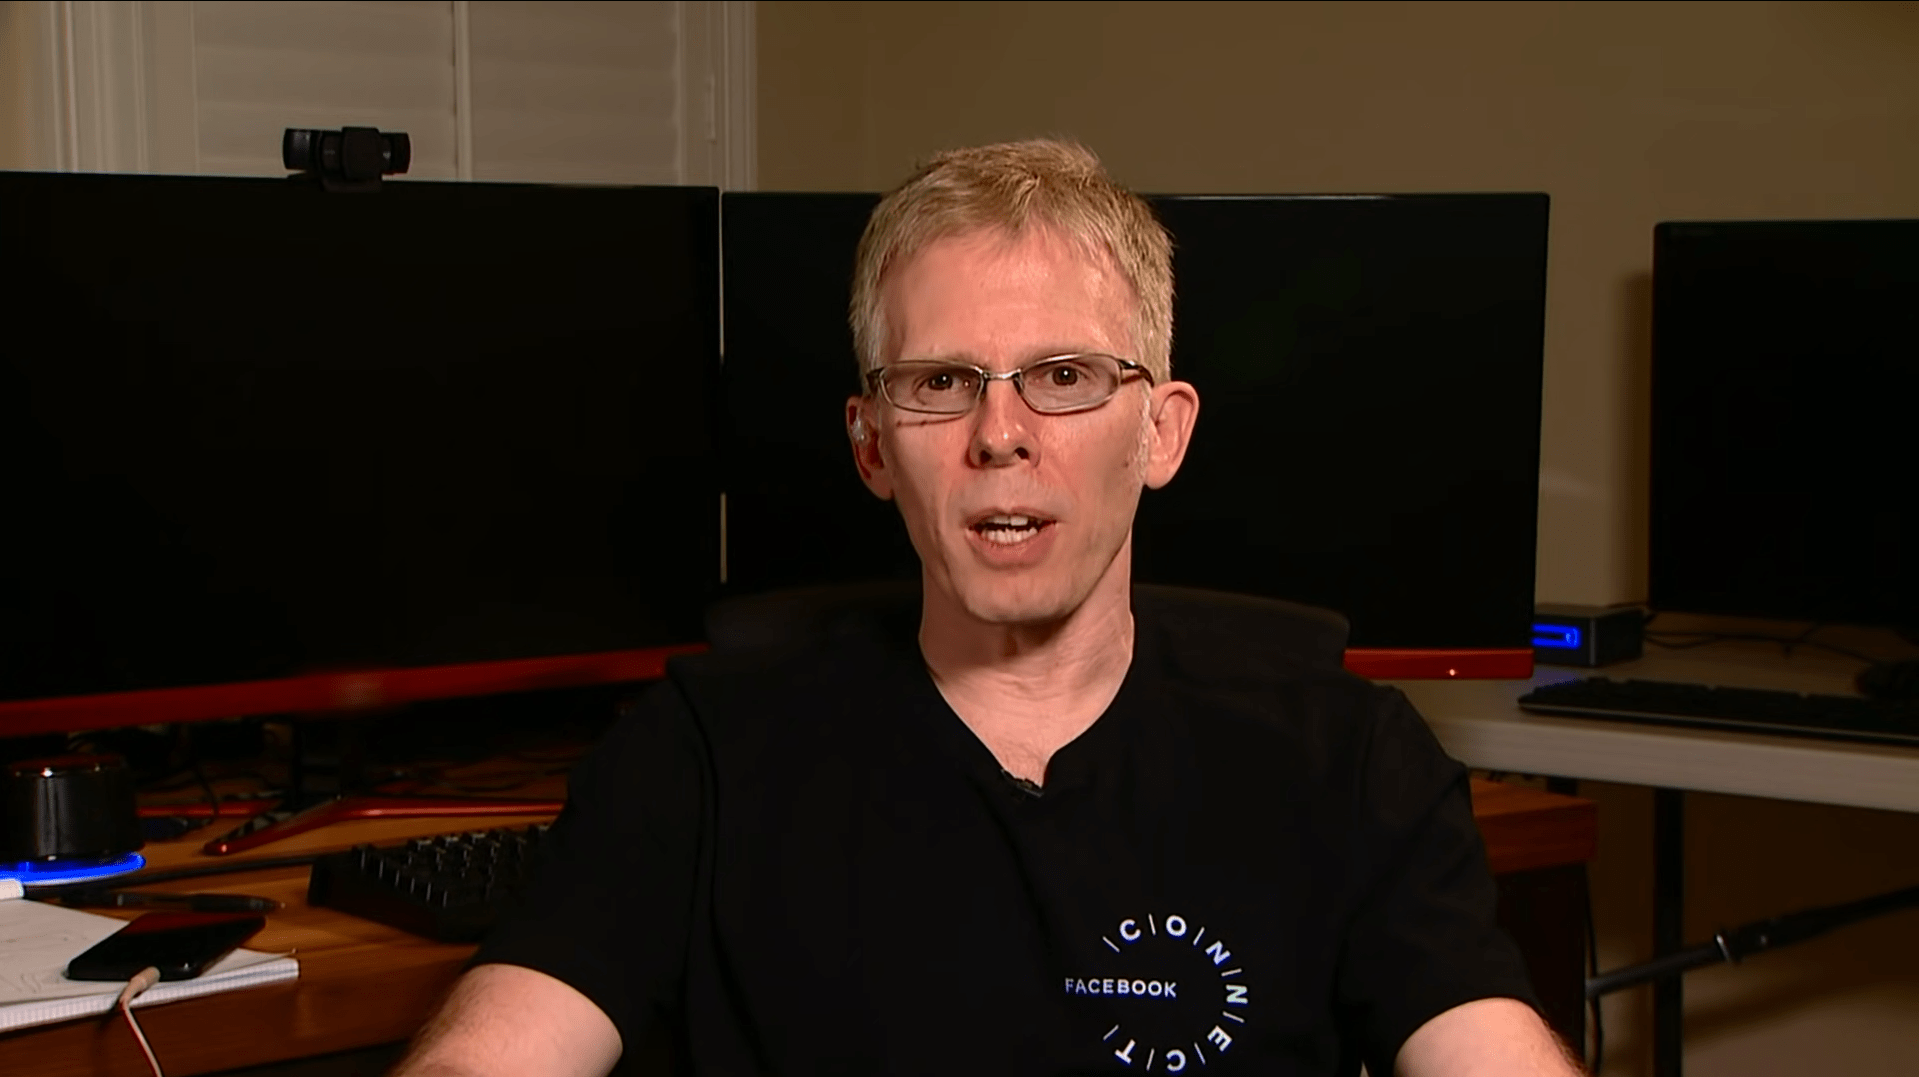 John Carmack talks turkey on and in VR at this year’s Meta Connect